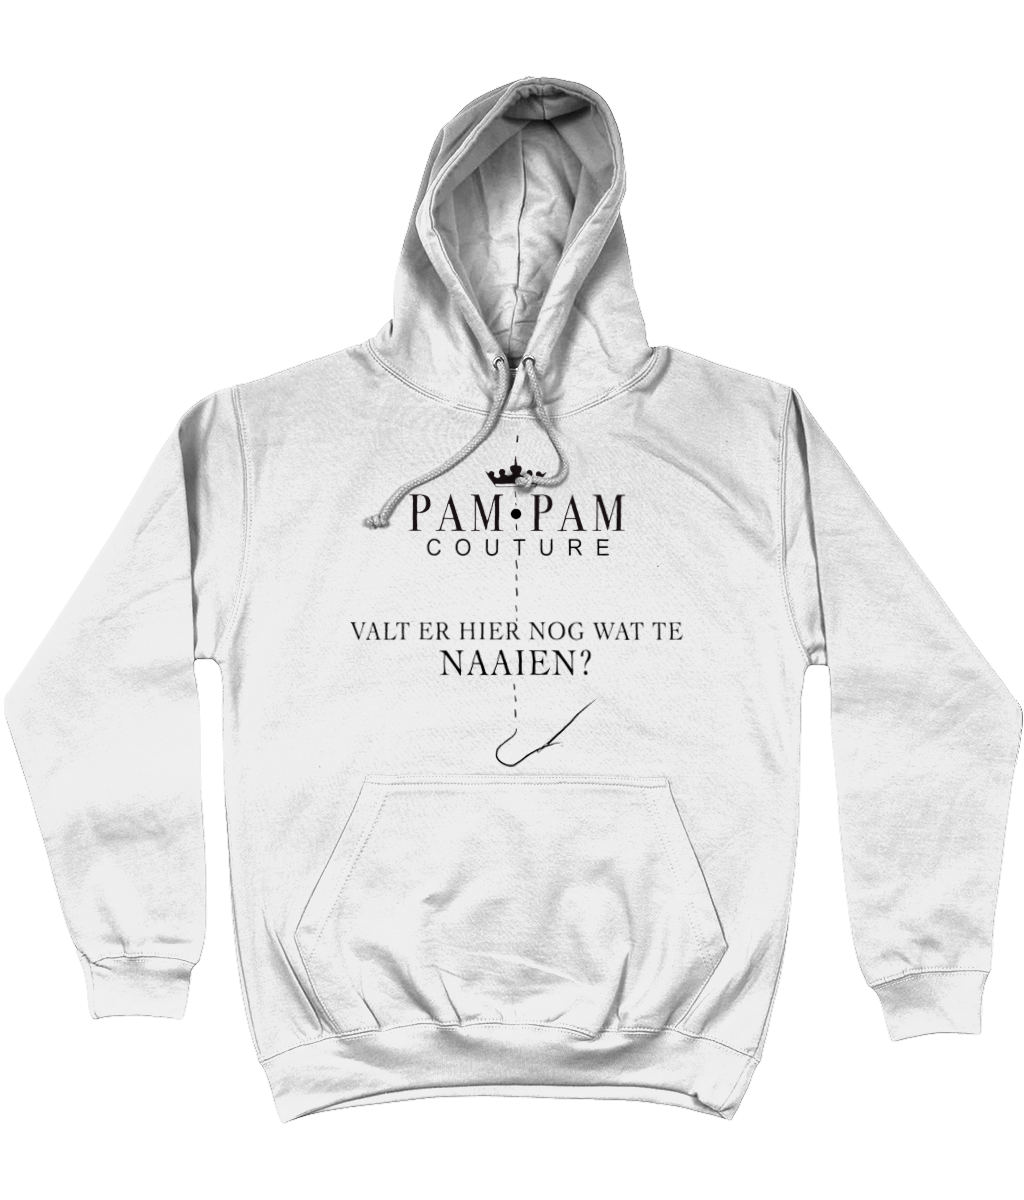 Patty Pam-Pam - Couture Hoodie